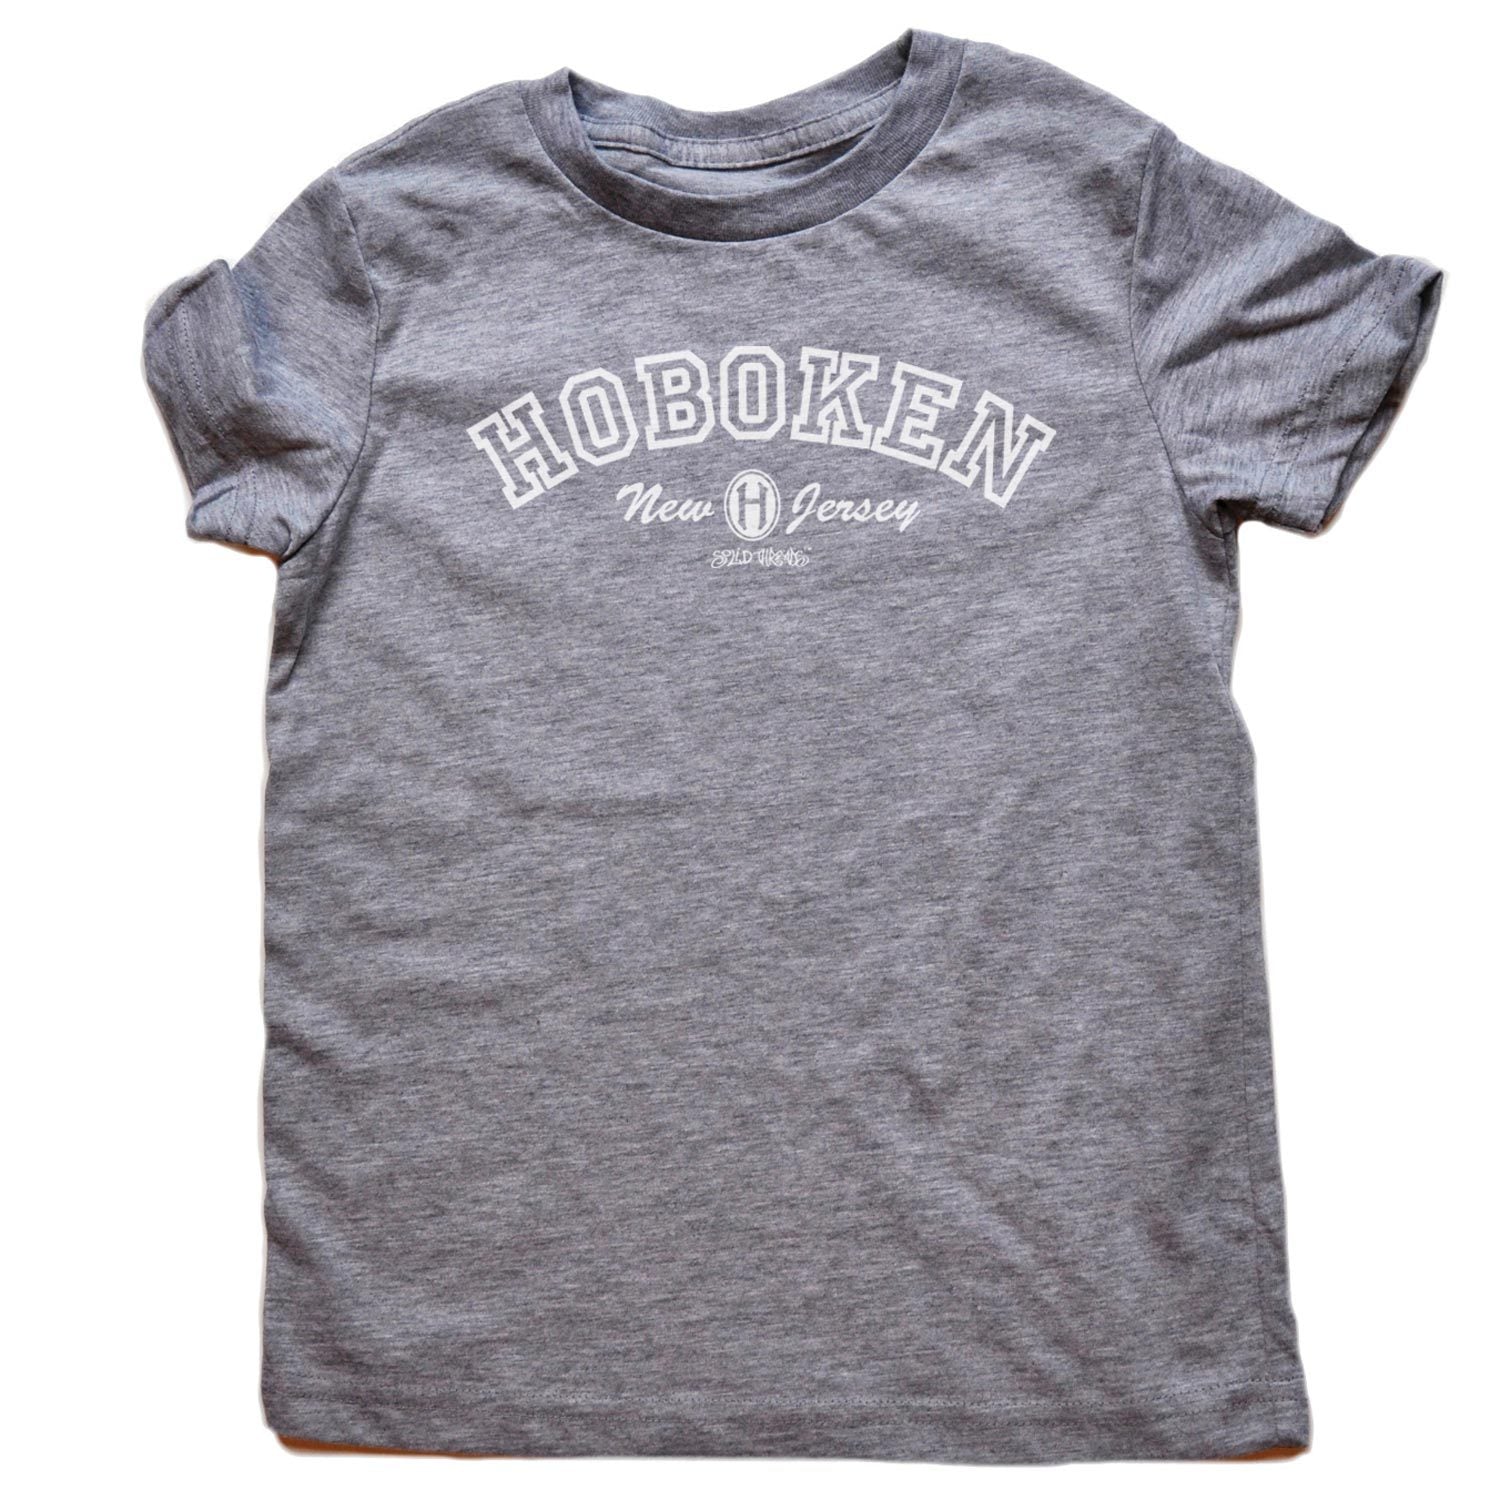 Kids Hoboken Collegiate Cool Graphic T-Shirt | Cute Retro New Jersey Soft Tee | Solid Threads